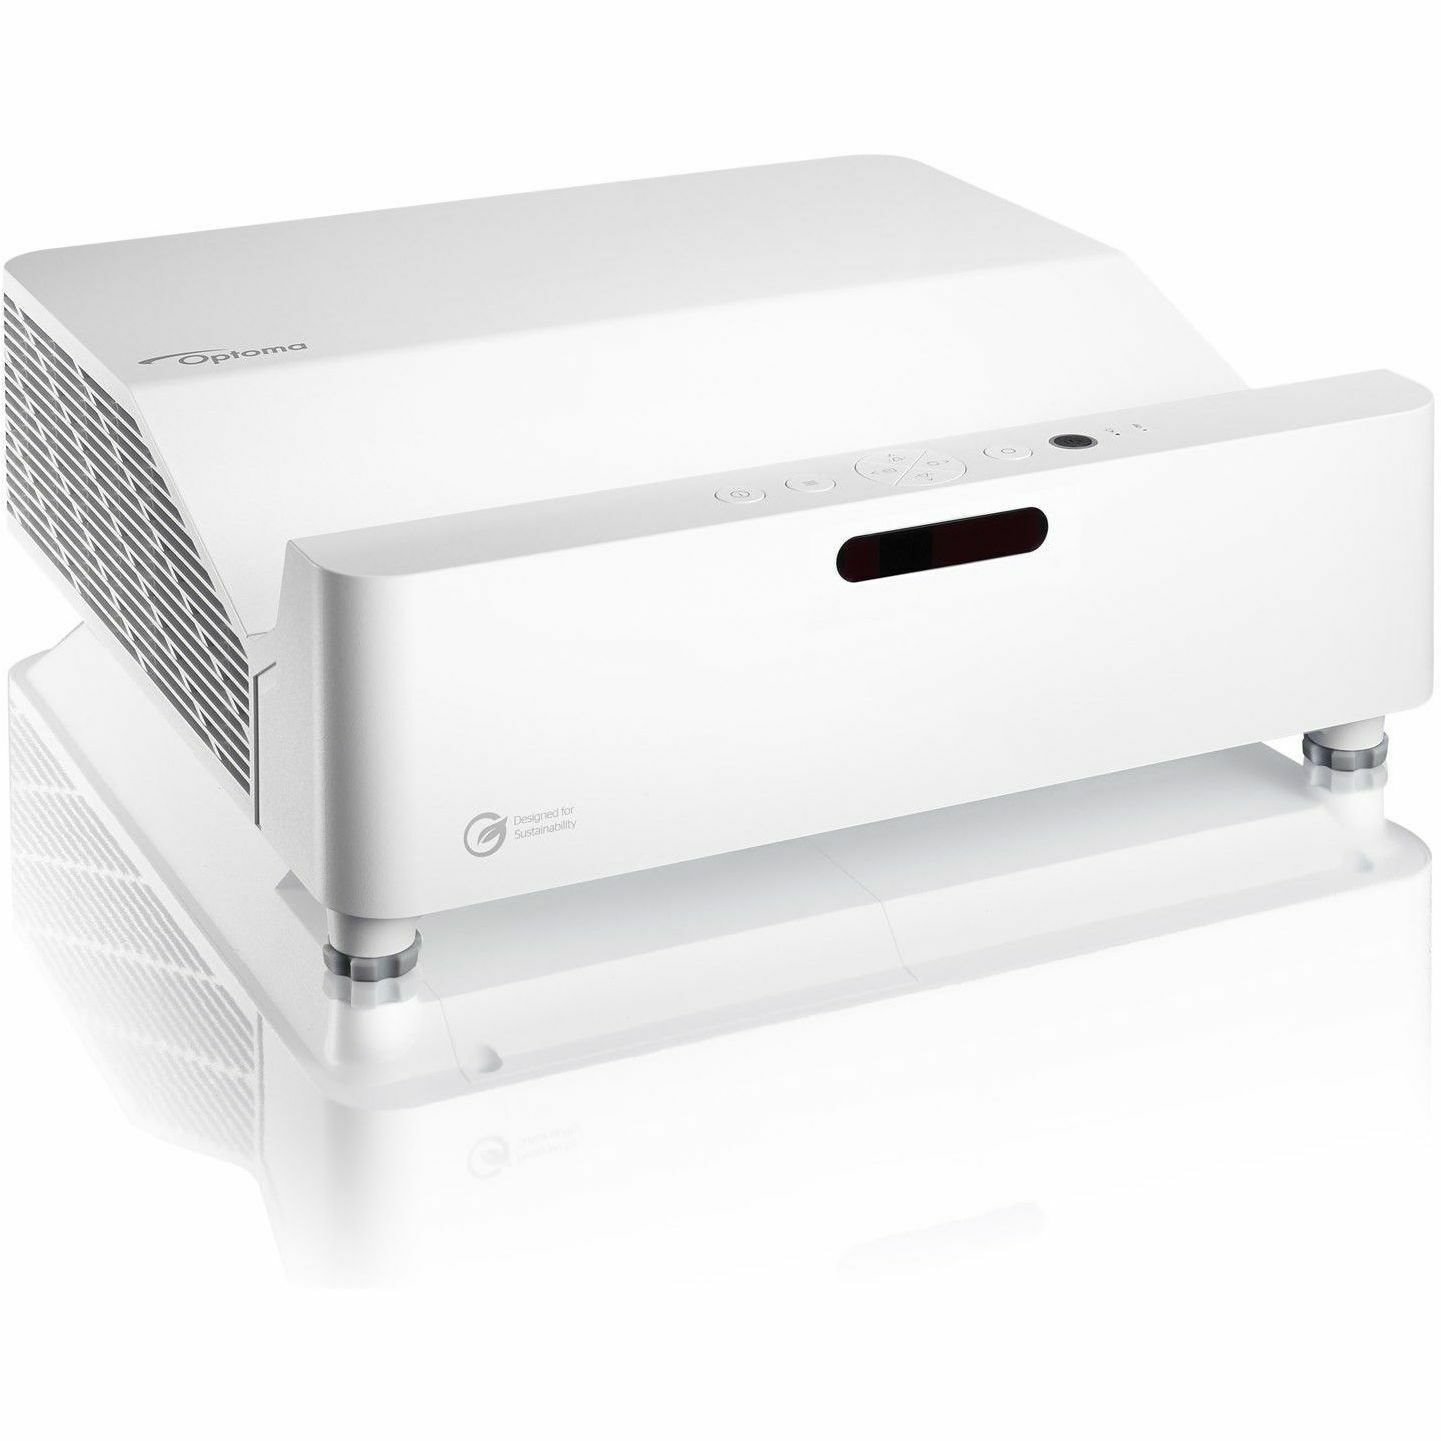 Optoma ZH430UST 3D Ultra Short Throw DLP Projector - 16:9 - White